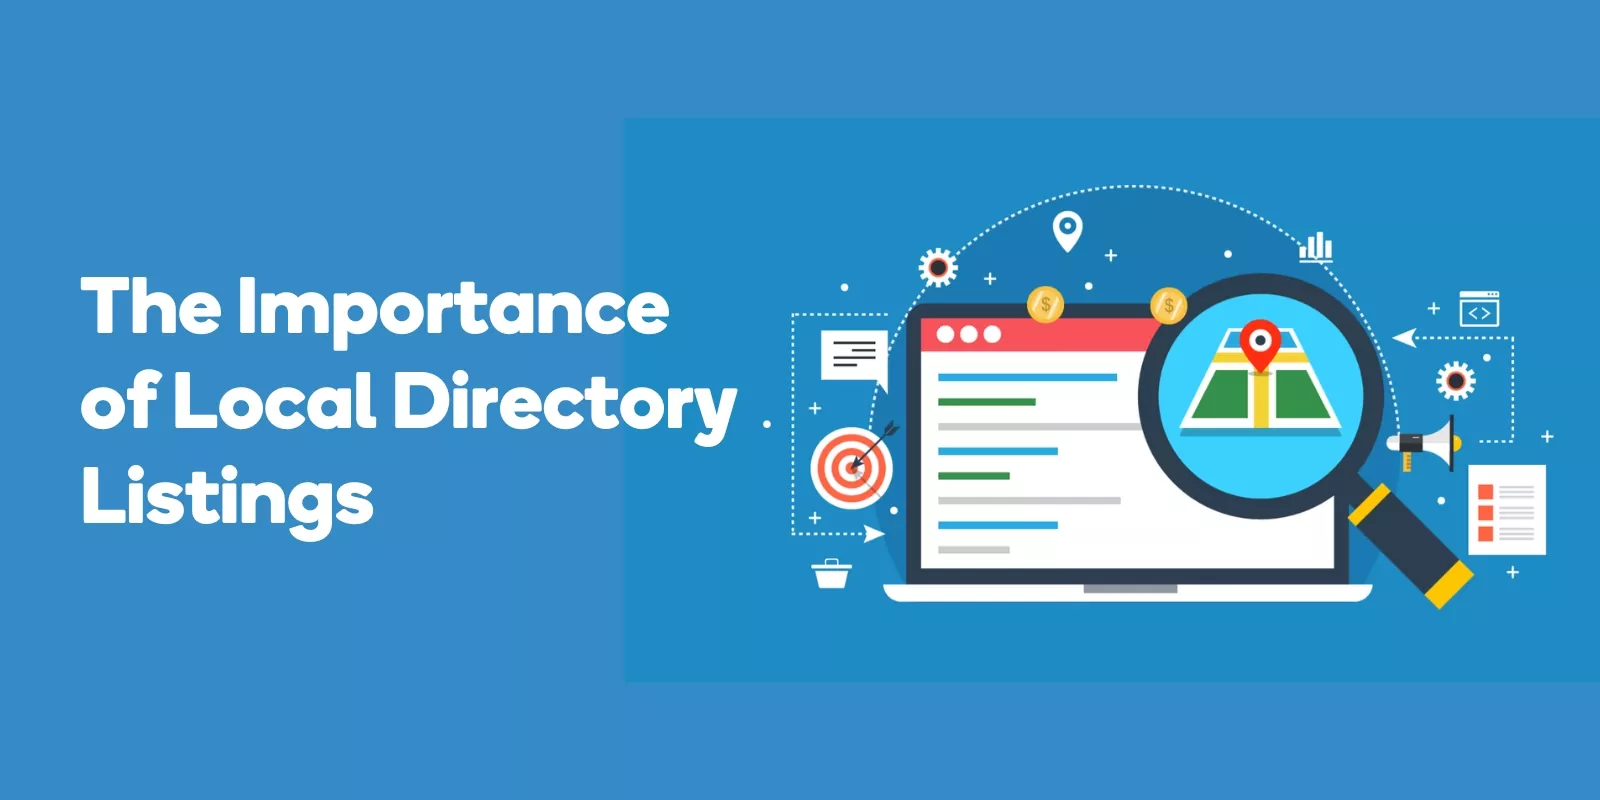 The Importance of Local Directory Listings